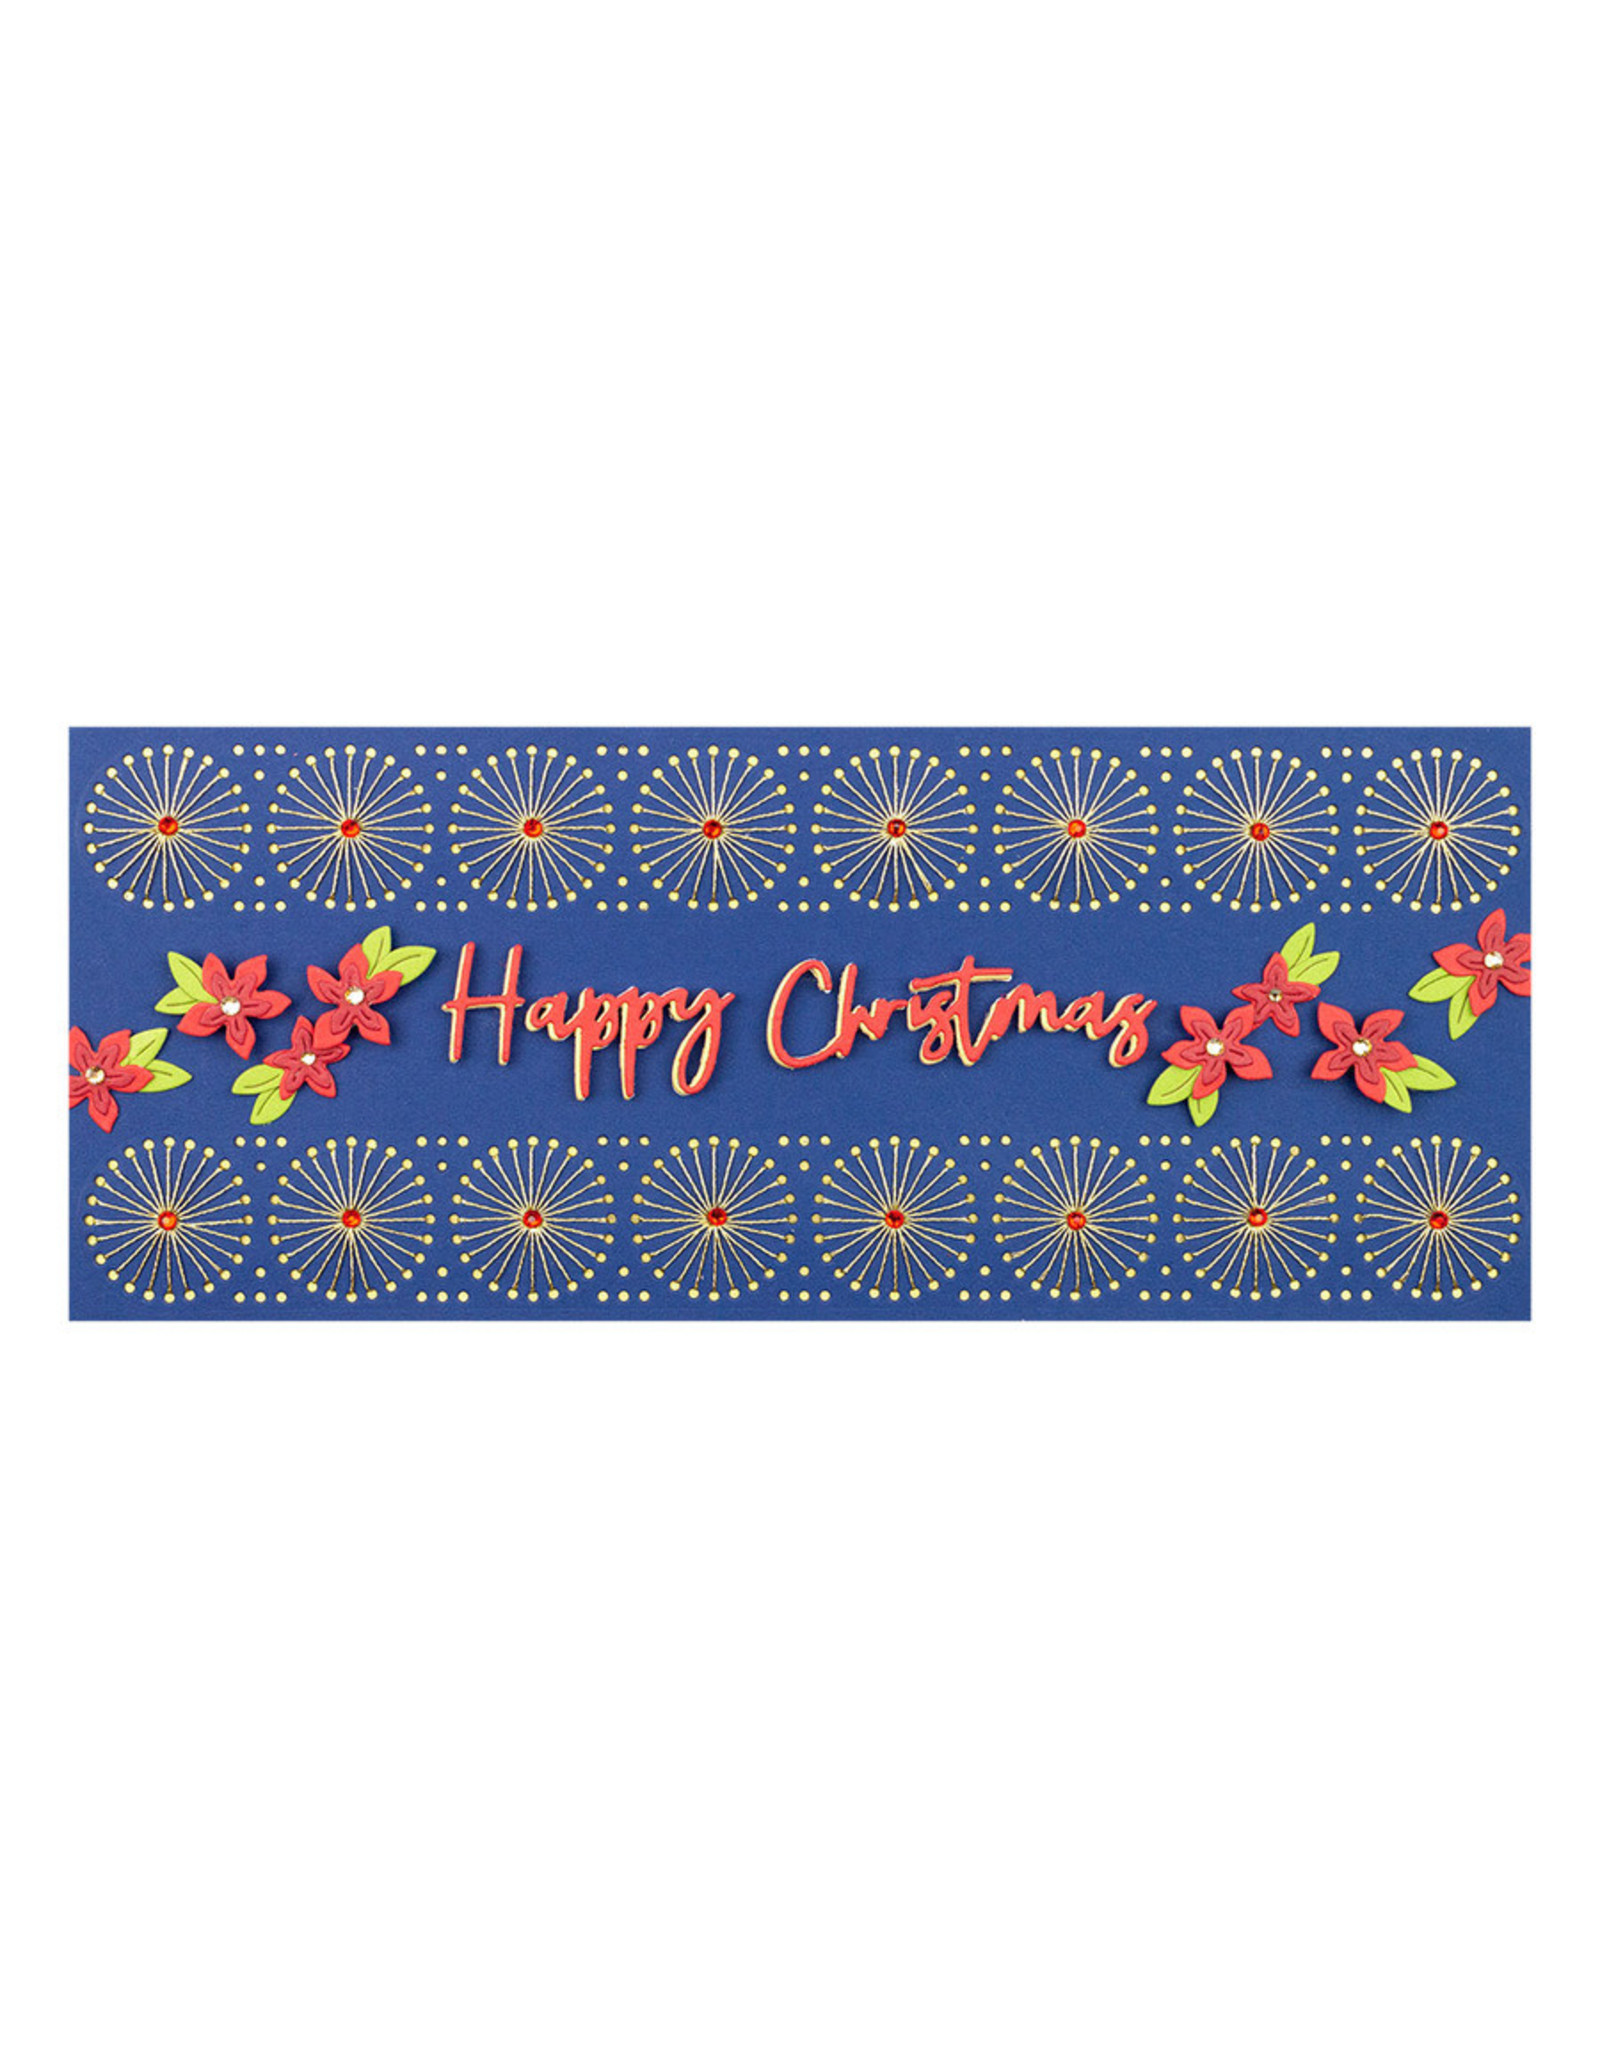 Spellbinders Circular Stitch Slimline Strip Etched Dies from the Merry Stitchmas Collection